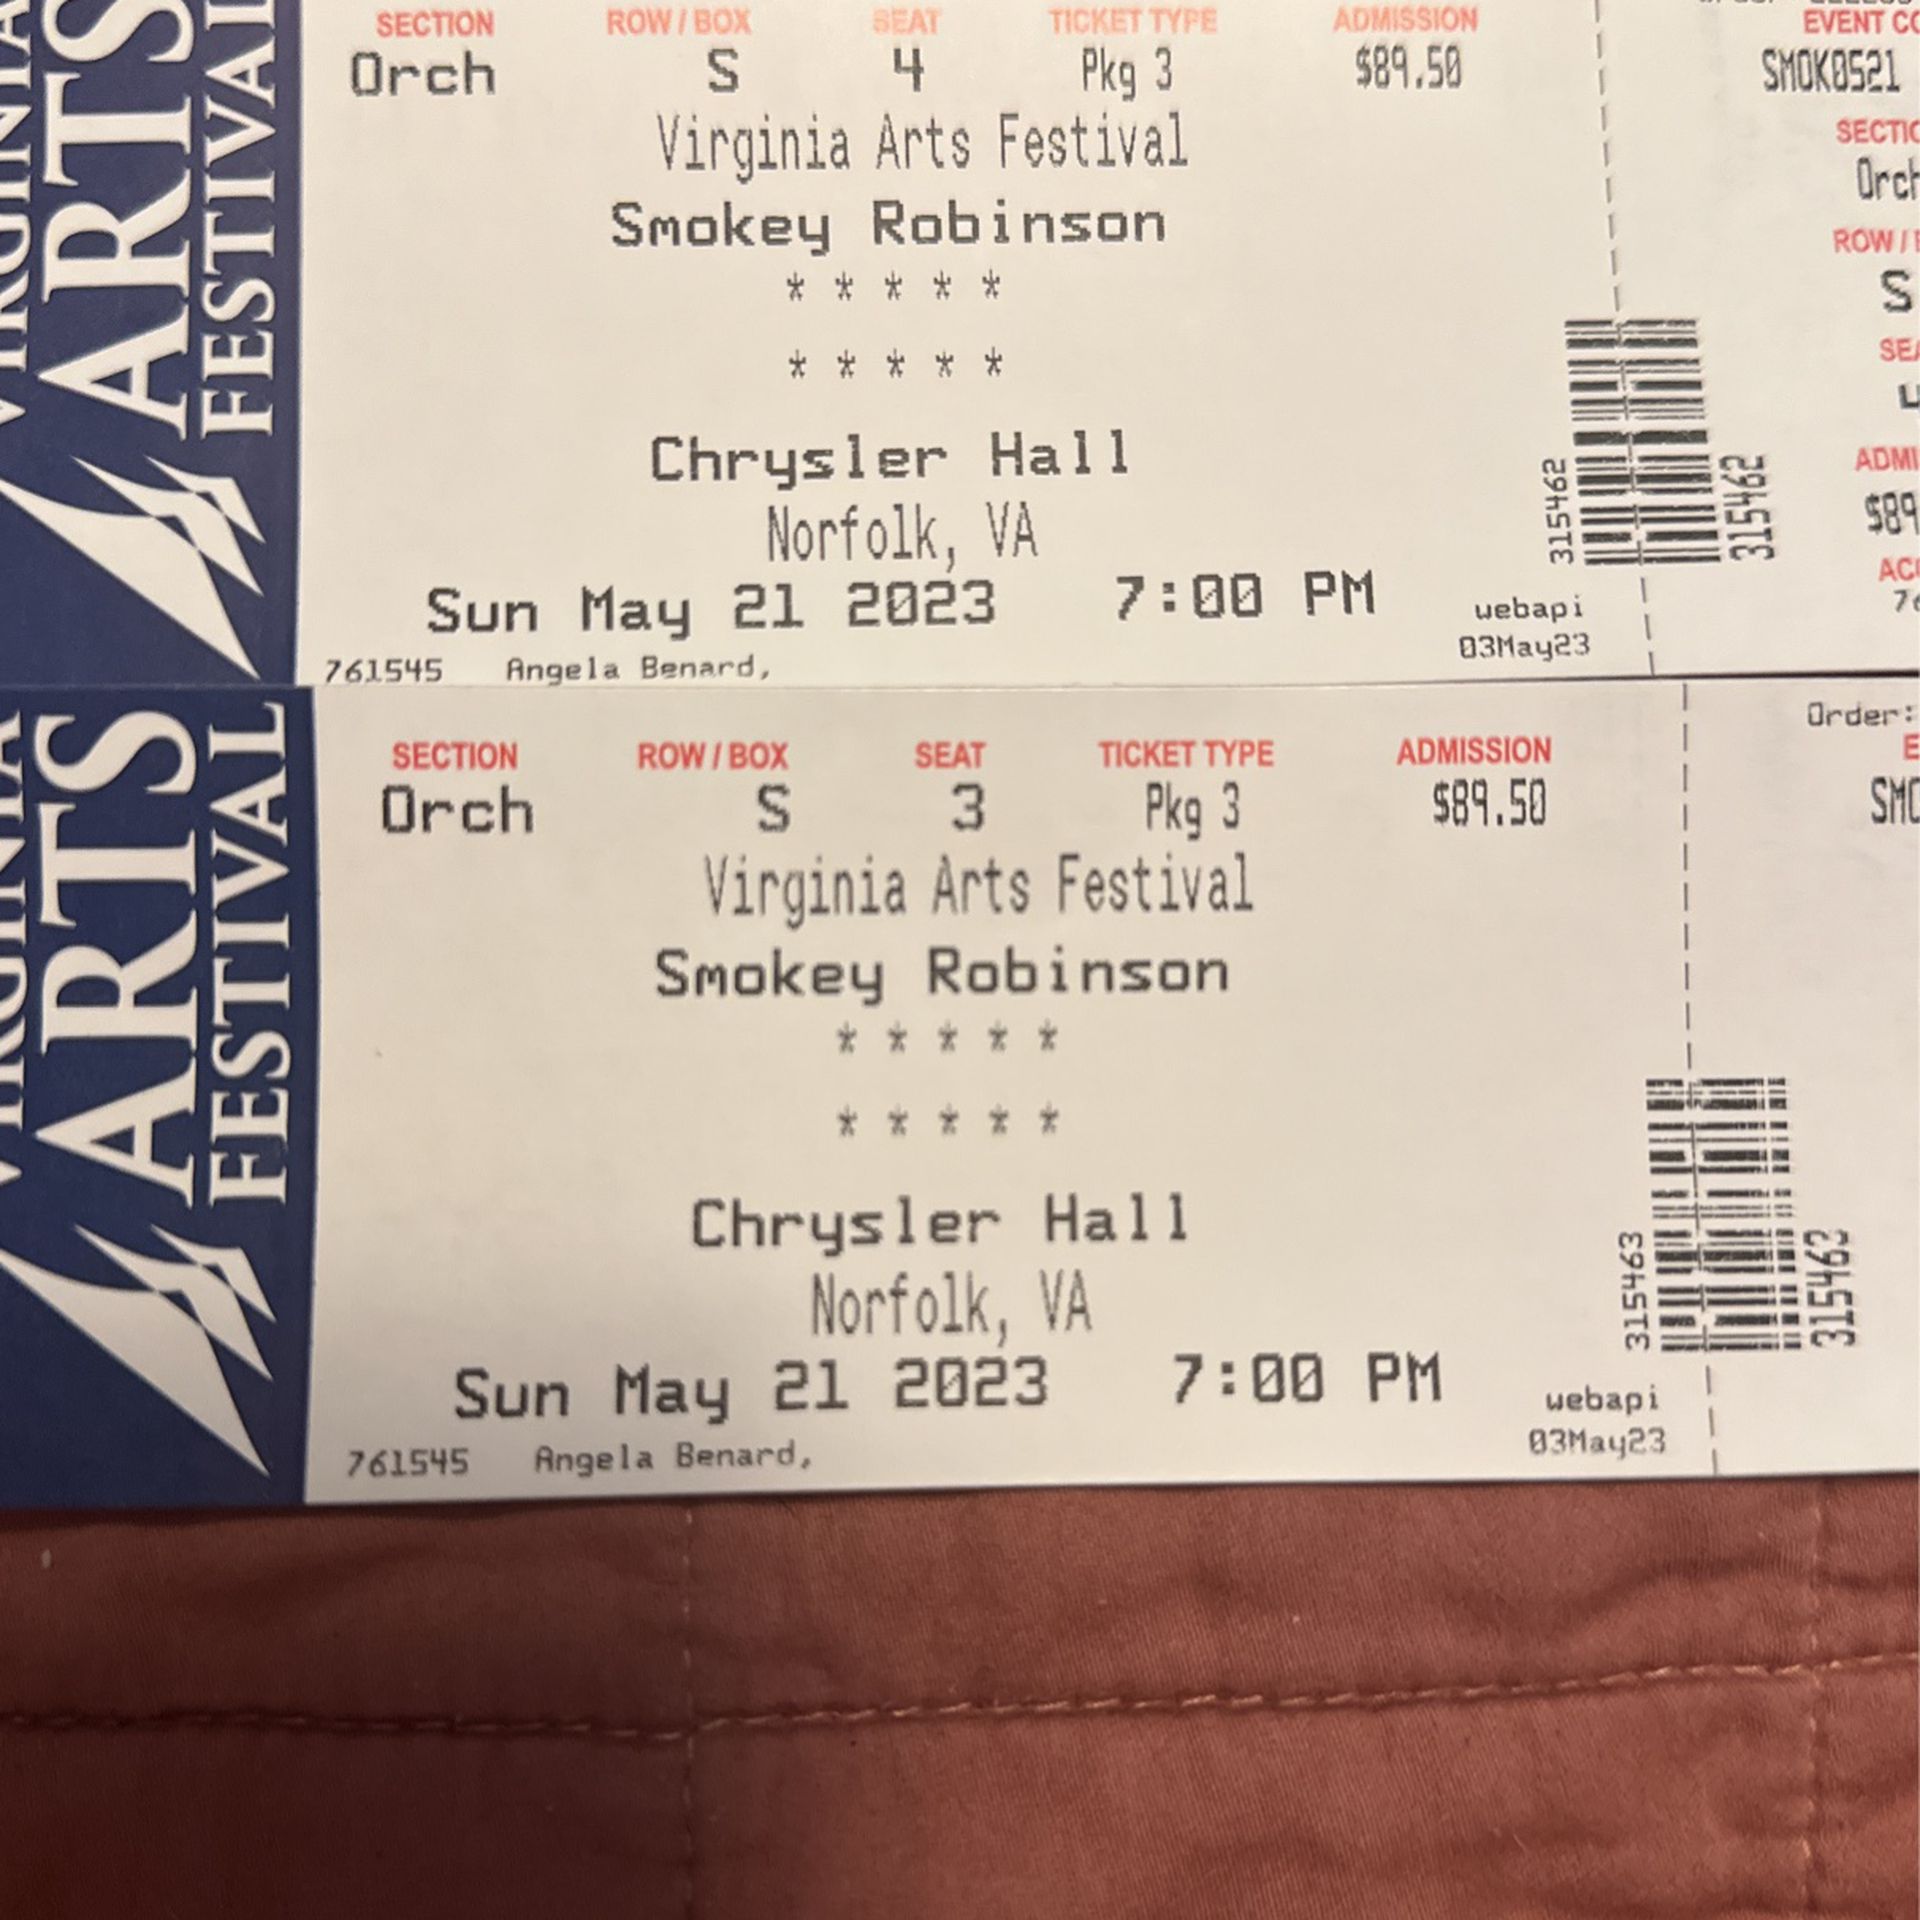 2 Tickets for Nearly SOLD OUT Smokey Robinson Show 5/21